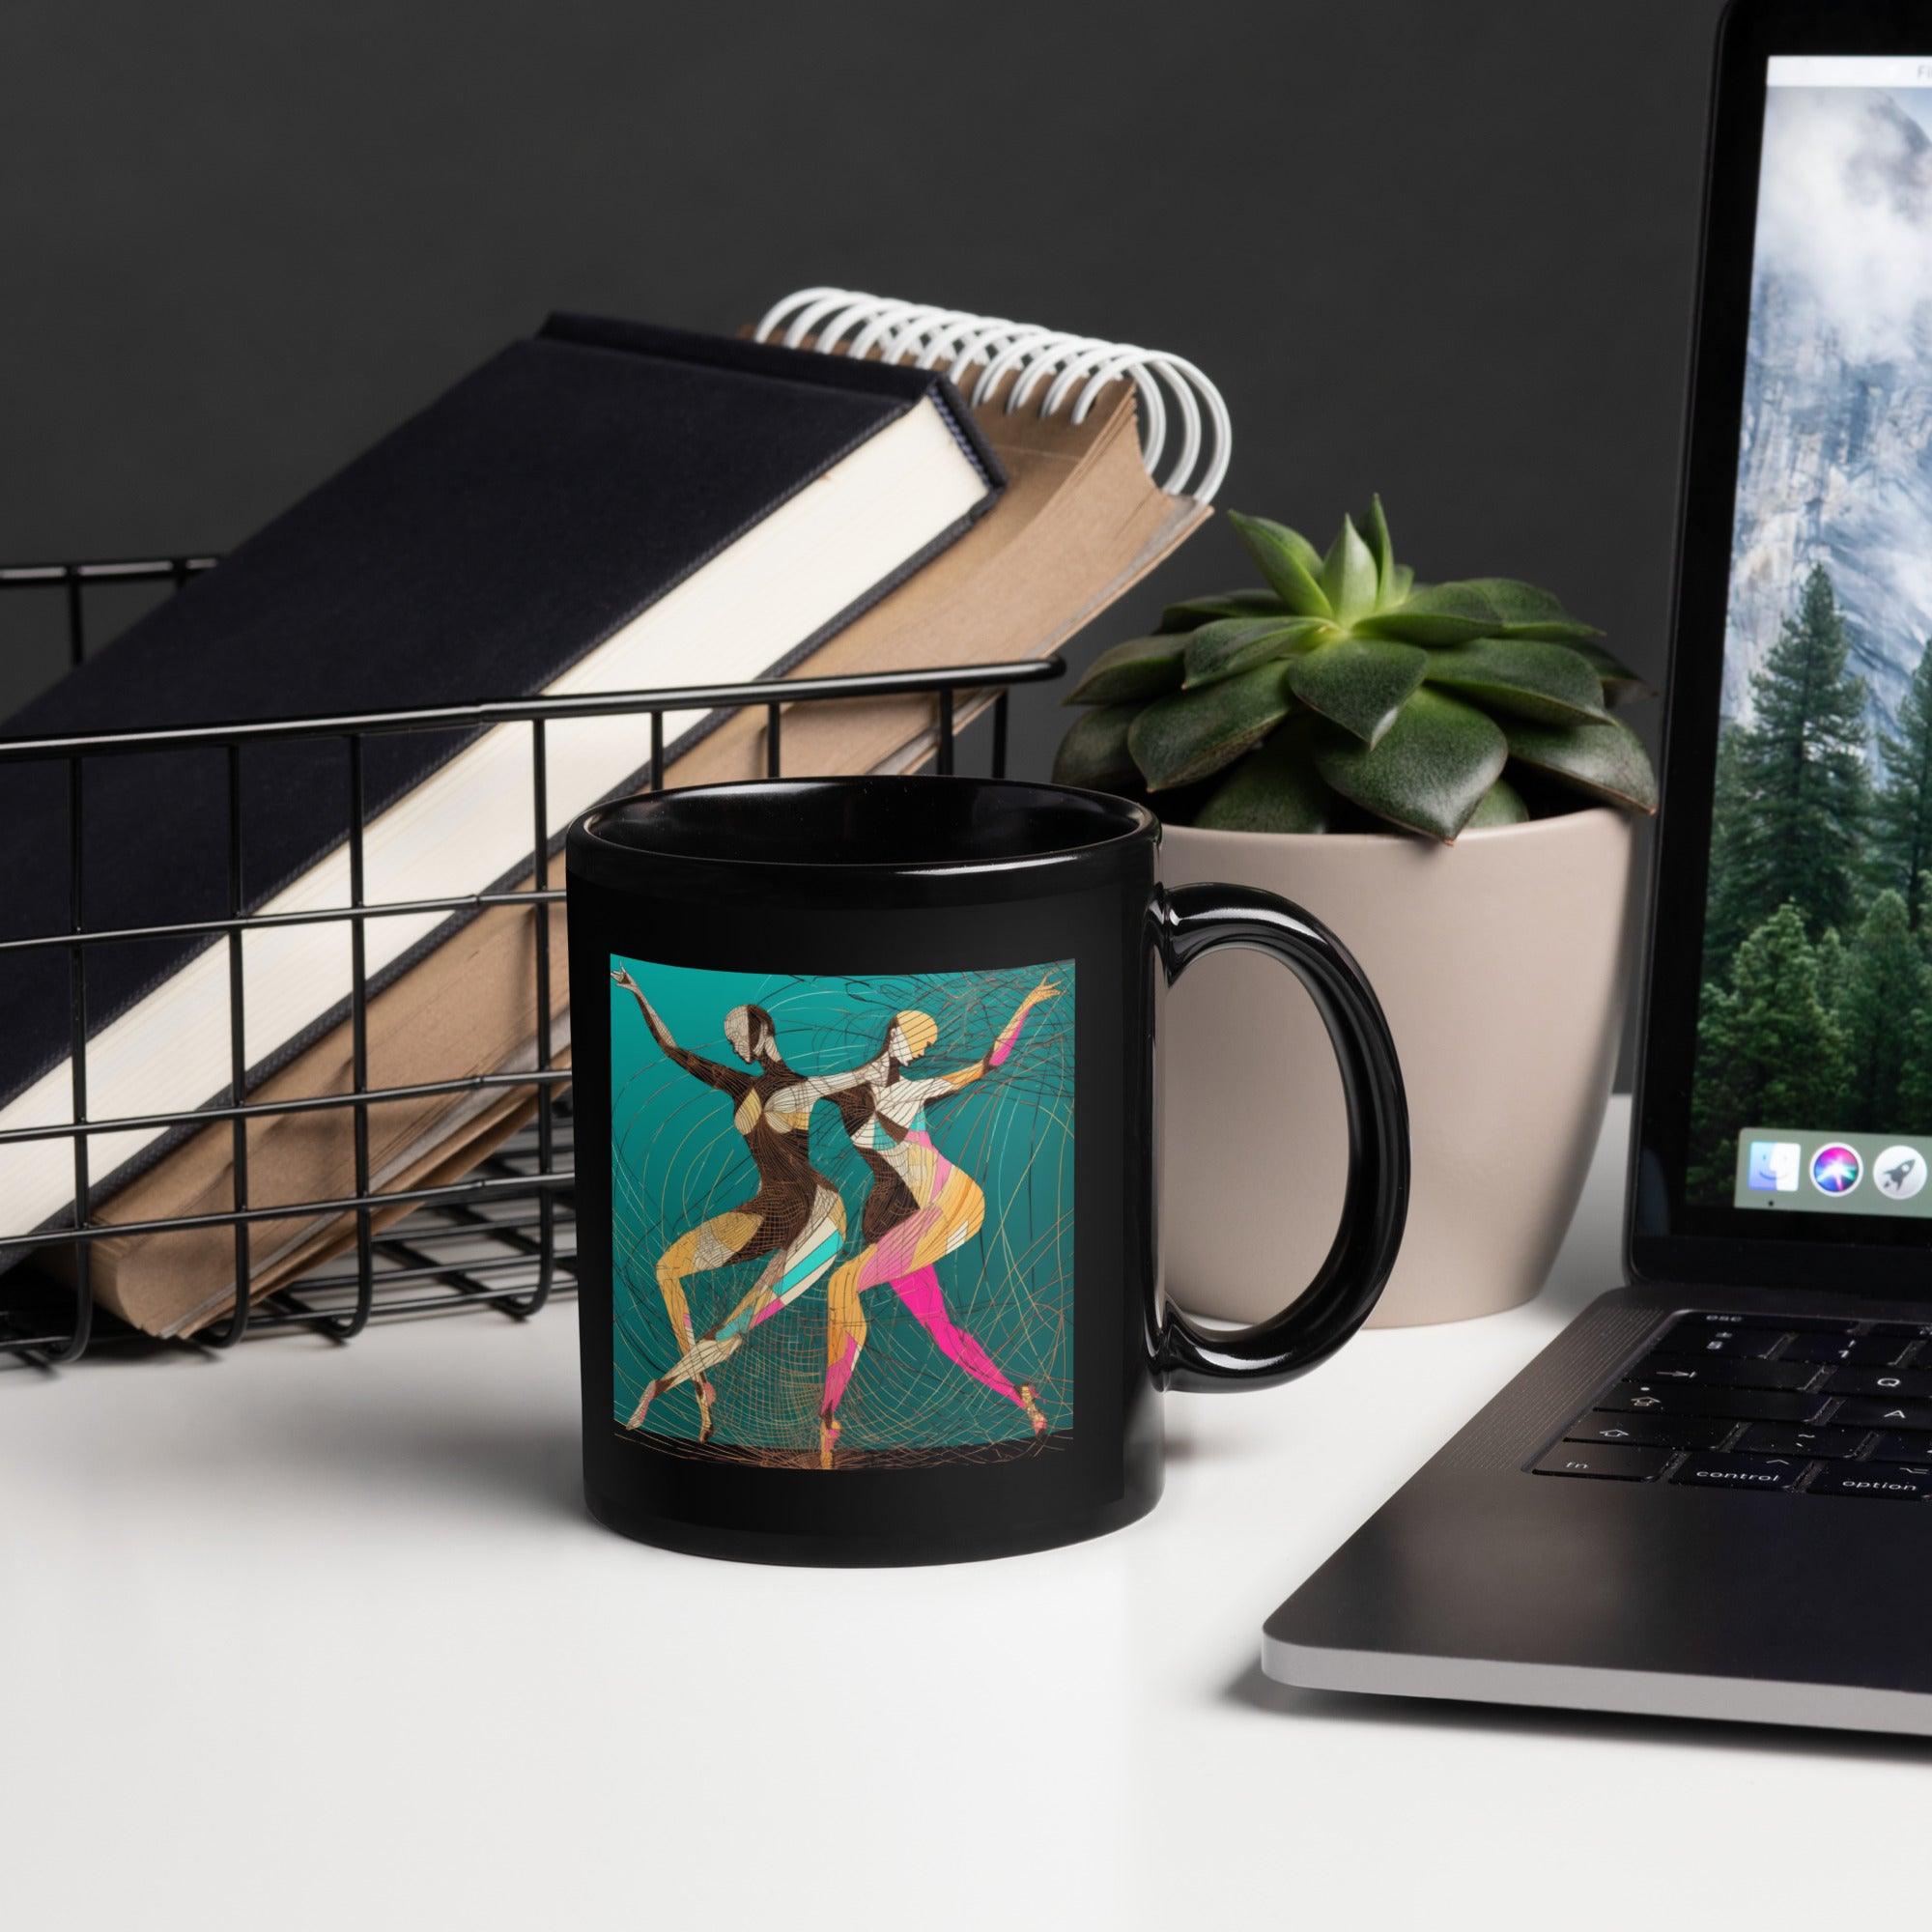 Athletic women's black glossy mug for dance enthusiasts.